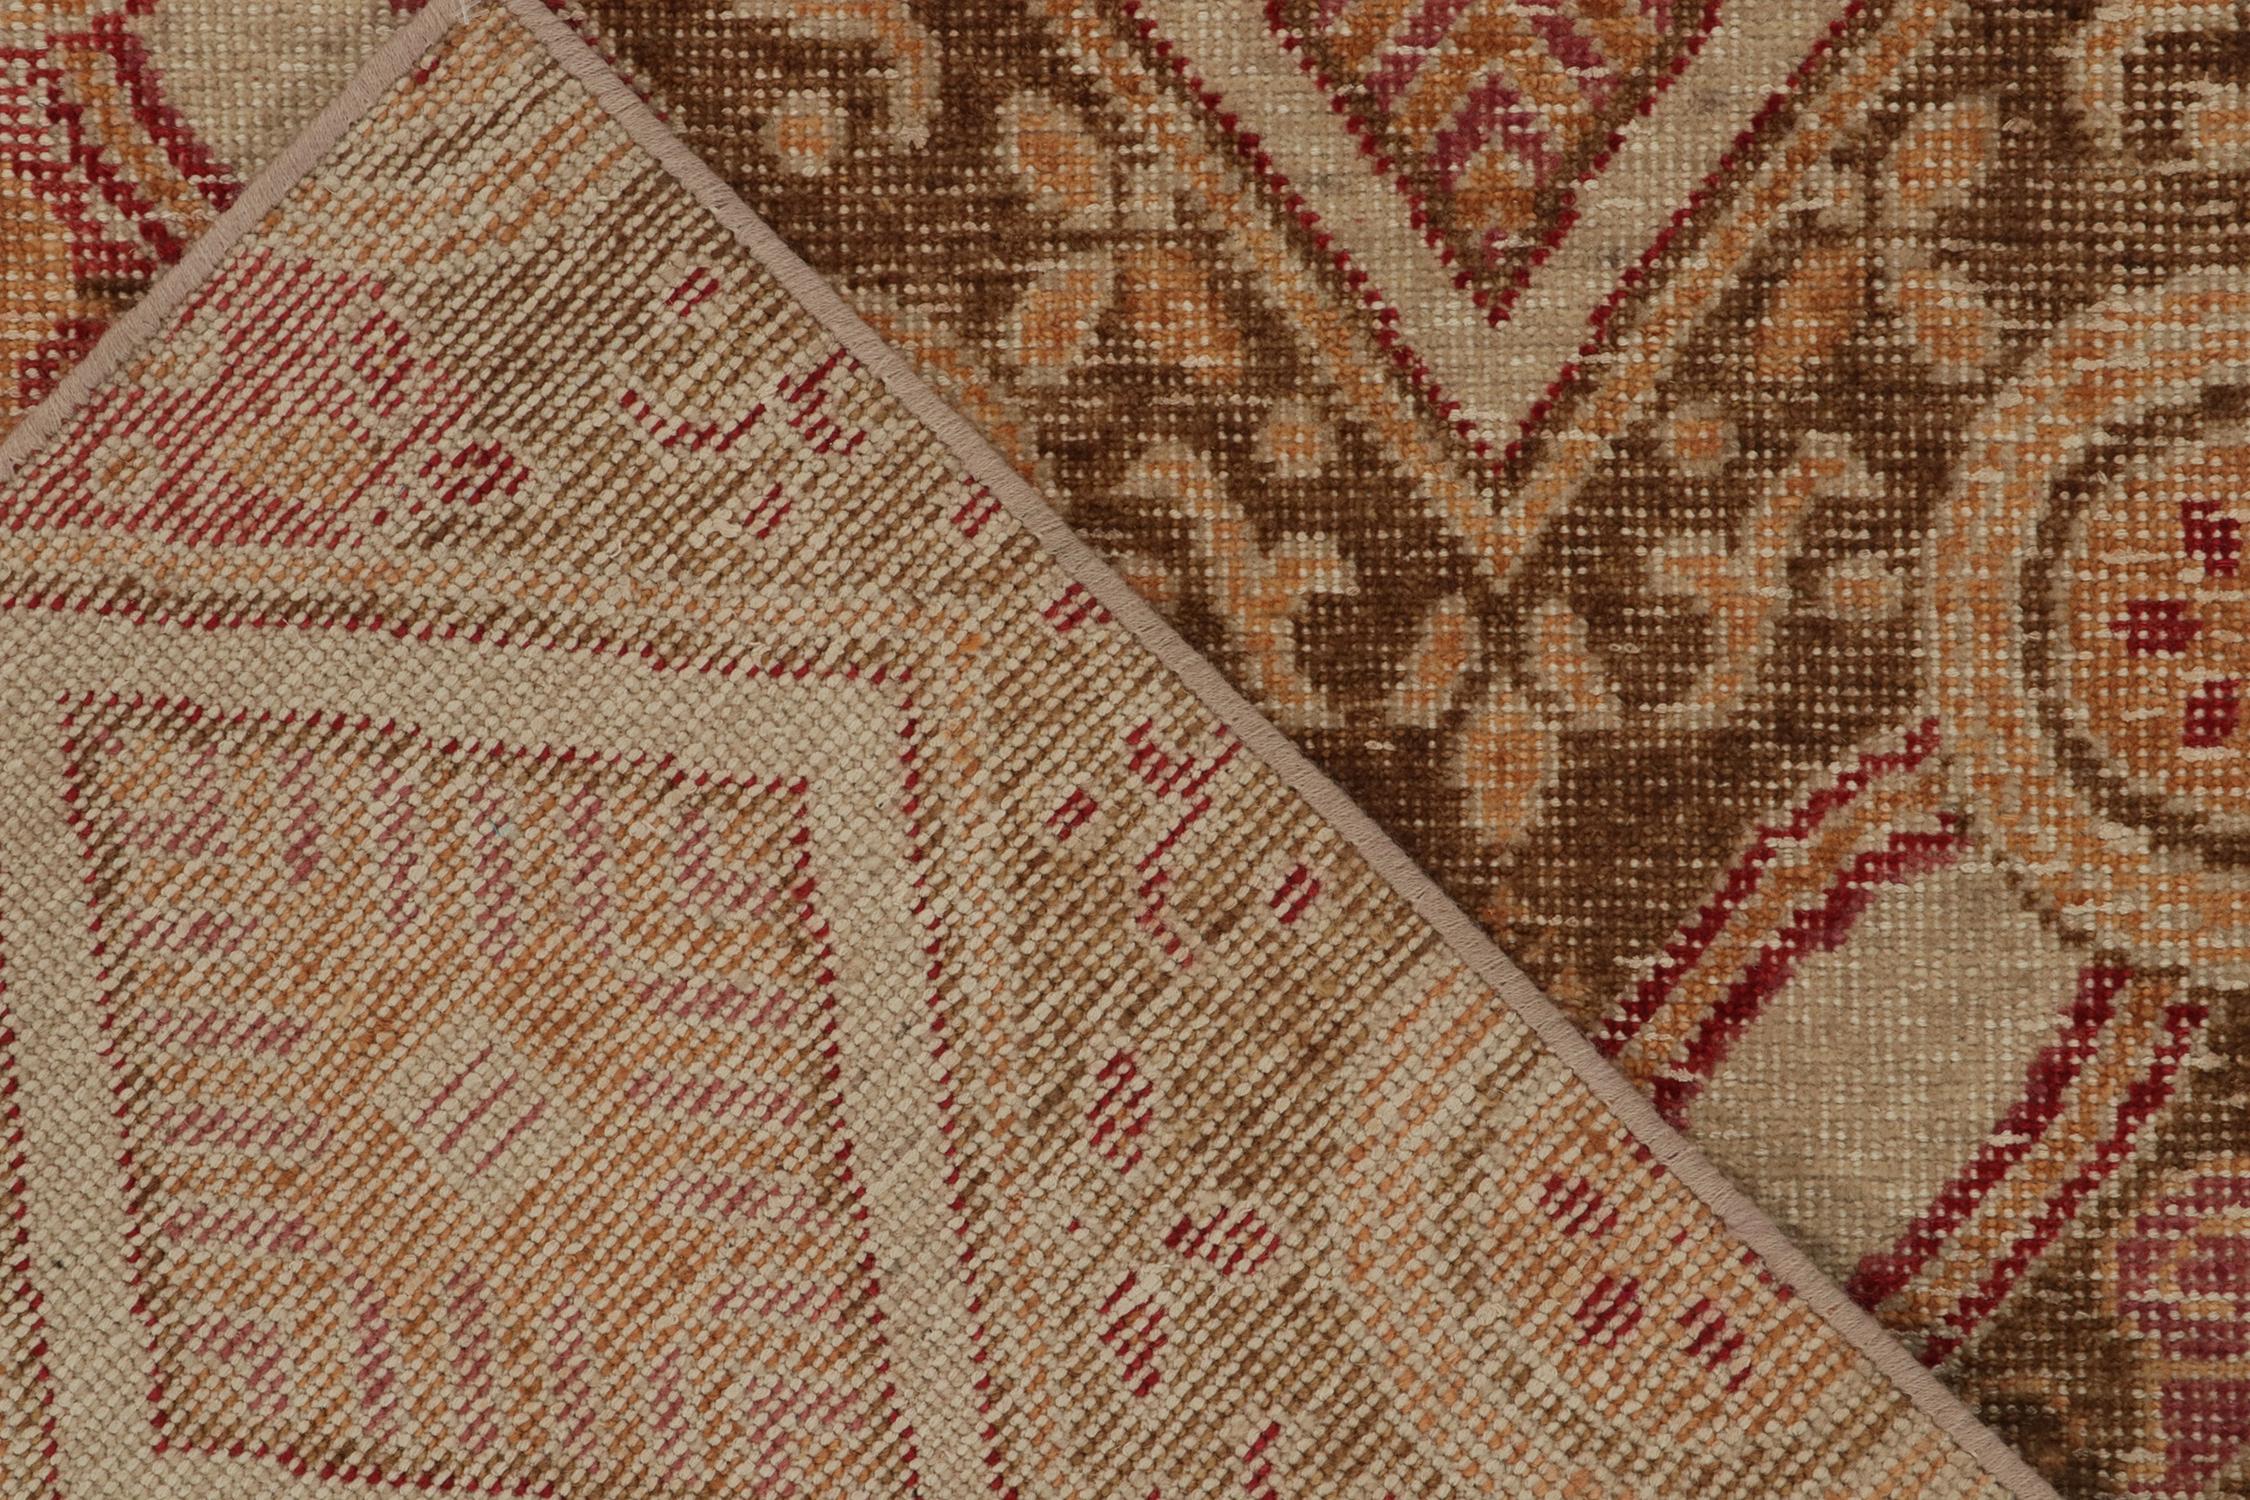 Tapis Rug & Kilim's Distressed Style Rug in Red, Green, Gold, White Trellises (en anglais) Neuf - En vente à Long Island City, NY